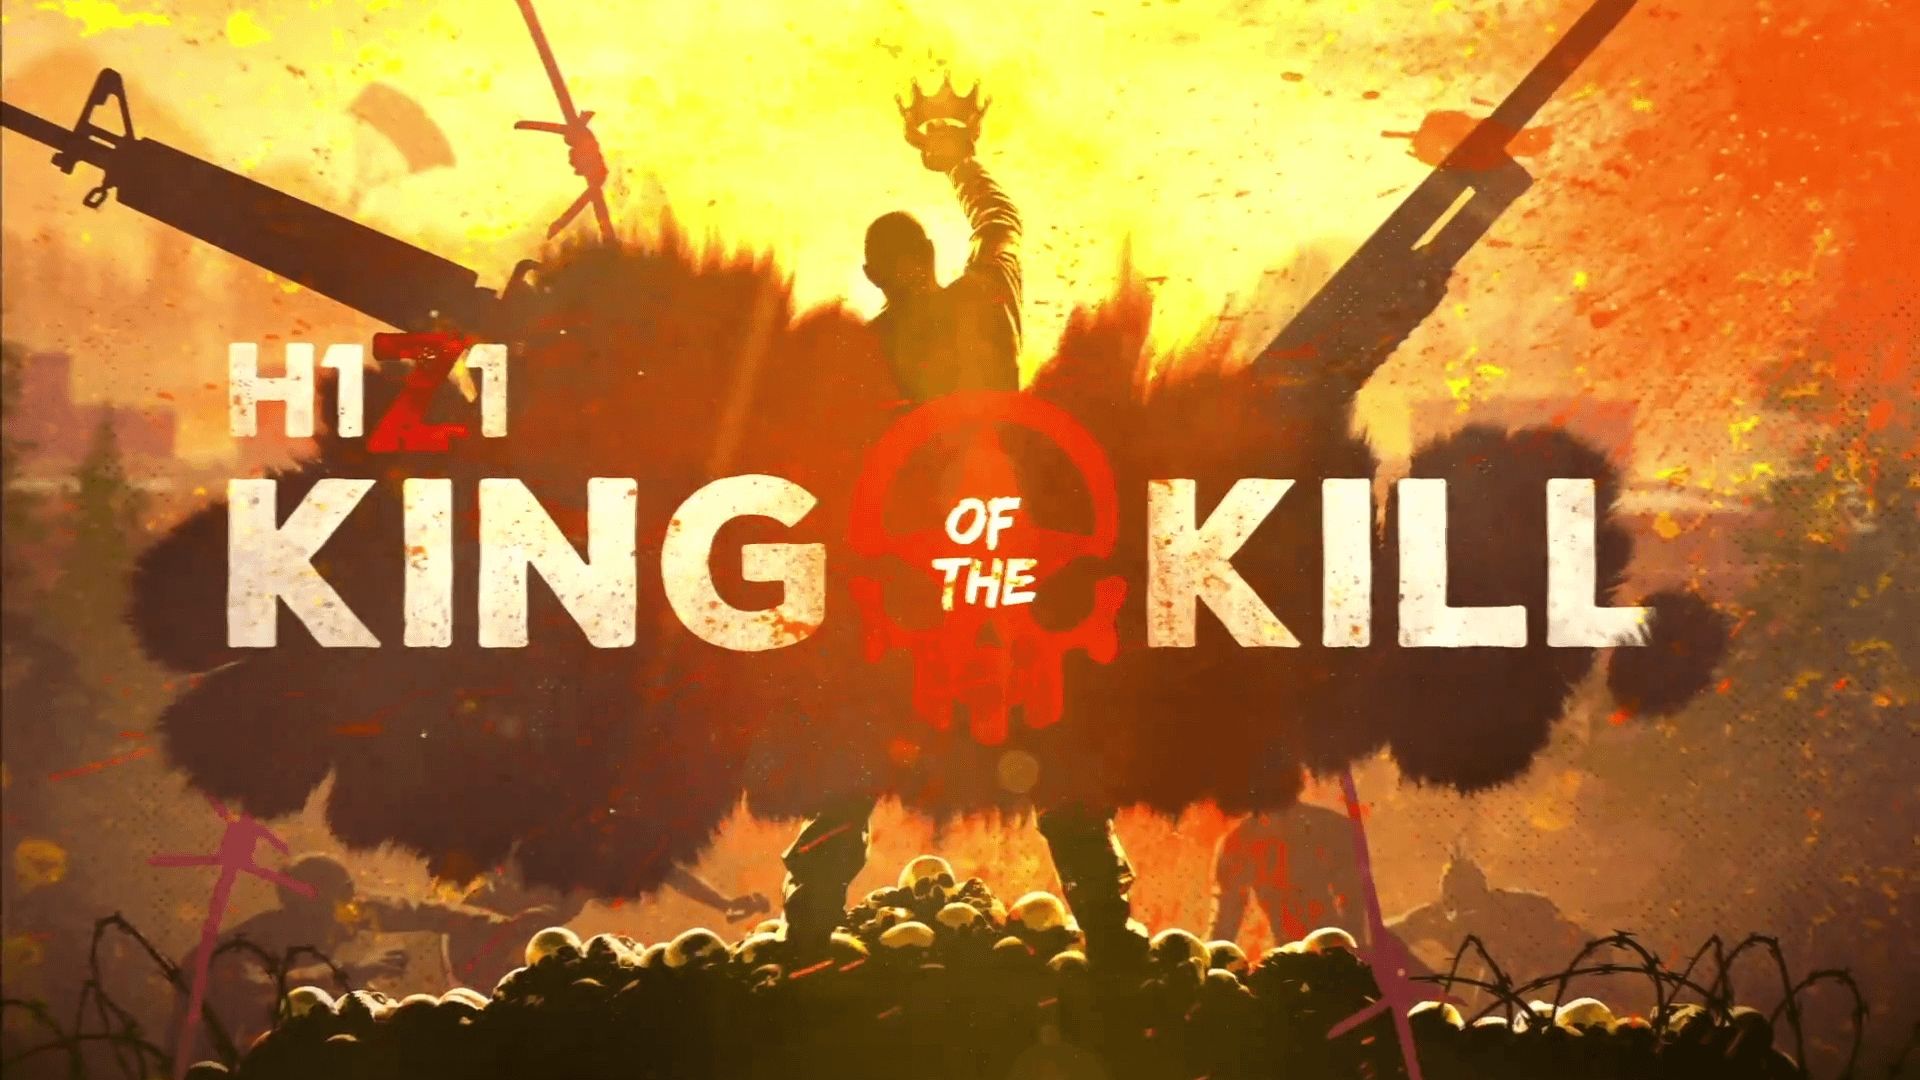 Free download H1Z1 King of the Kill Wallpaper